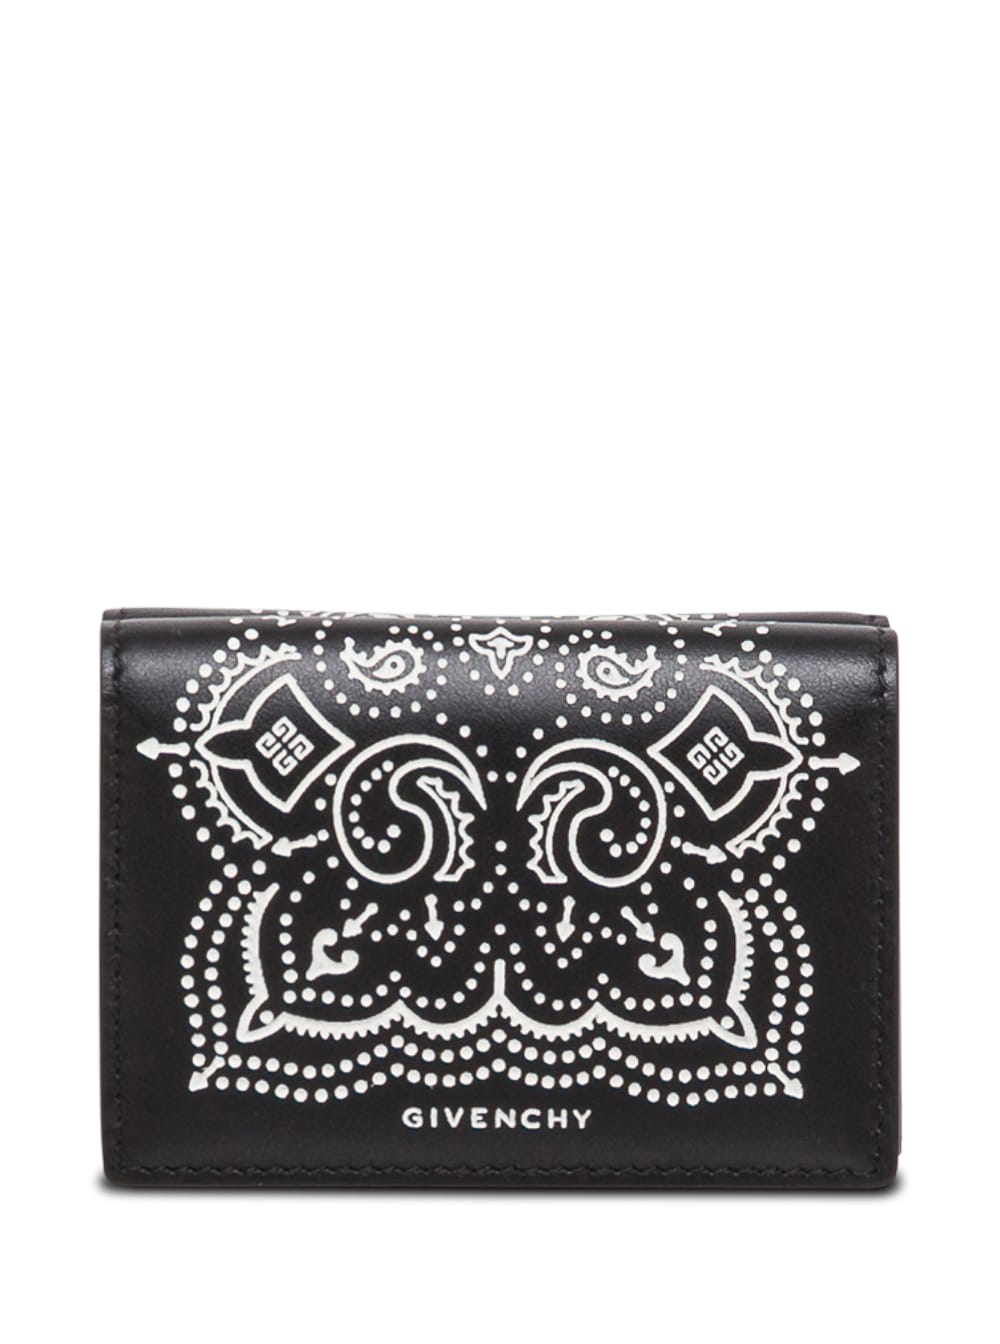 Givenchy Black And White Leather Wallet With Bandana Print